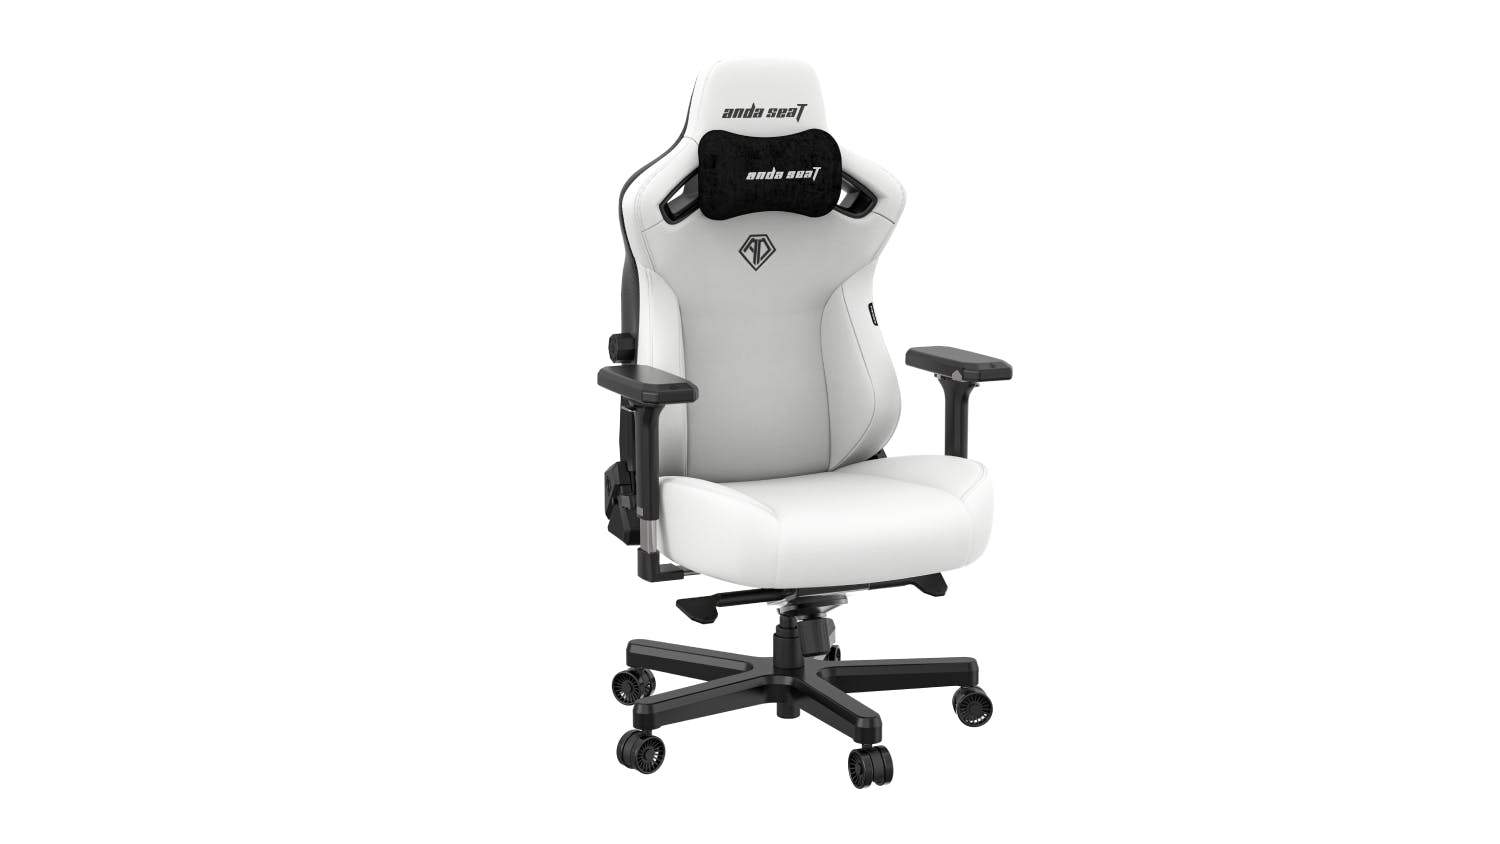 AndaSeat Kaiser 3 Series Gaming Chair Large - White PU Leather